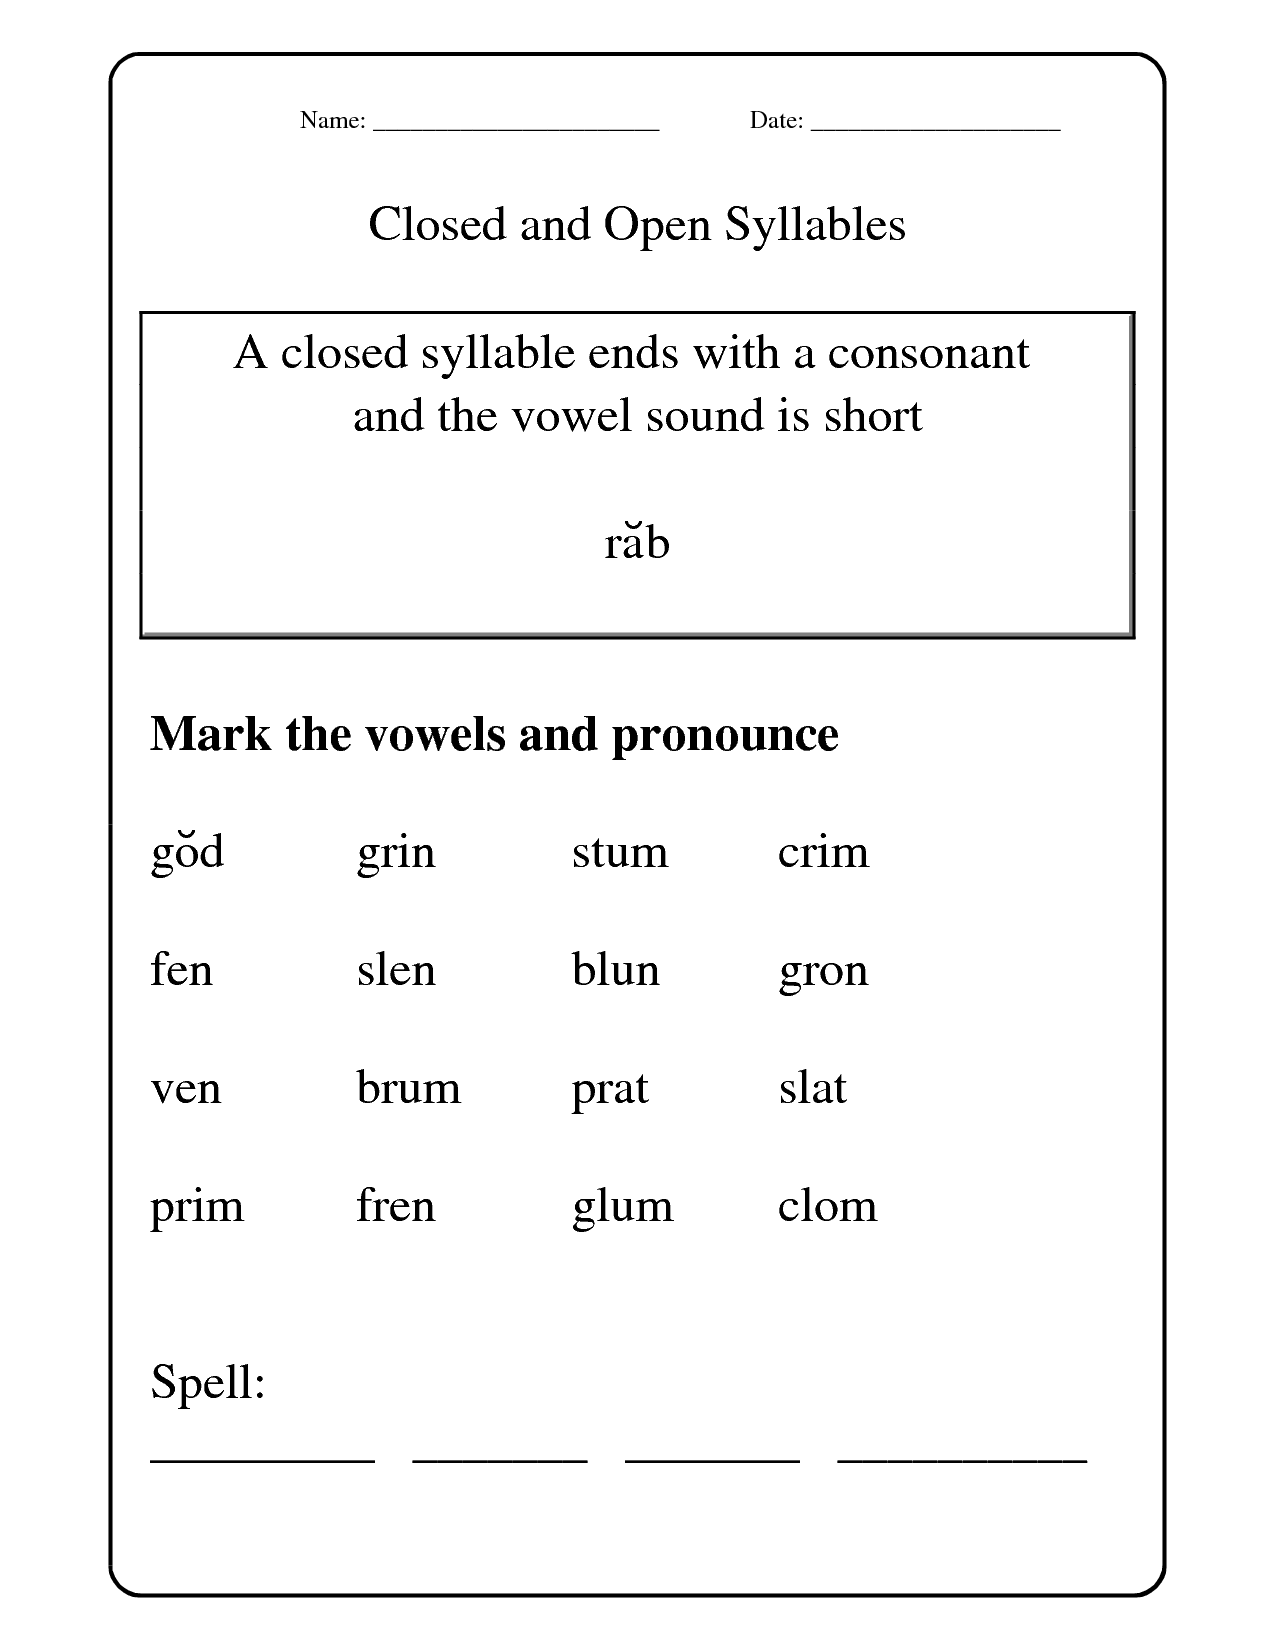 Open and Closed Syllables Worksheets Image